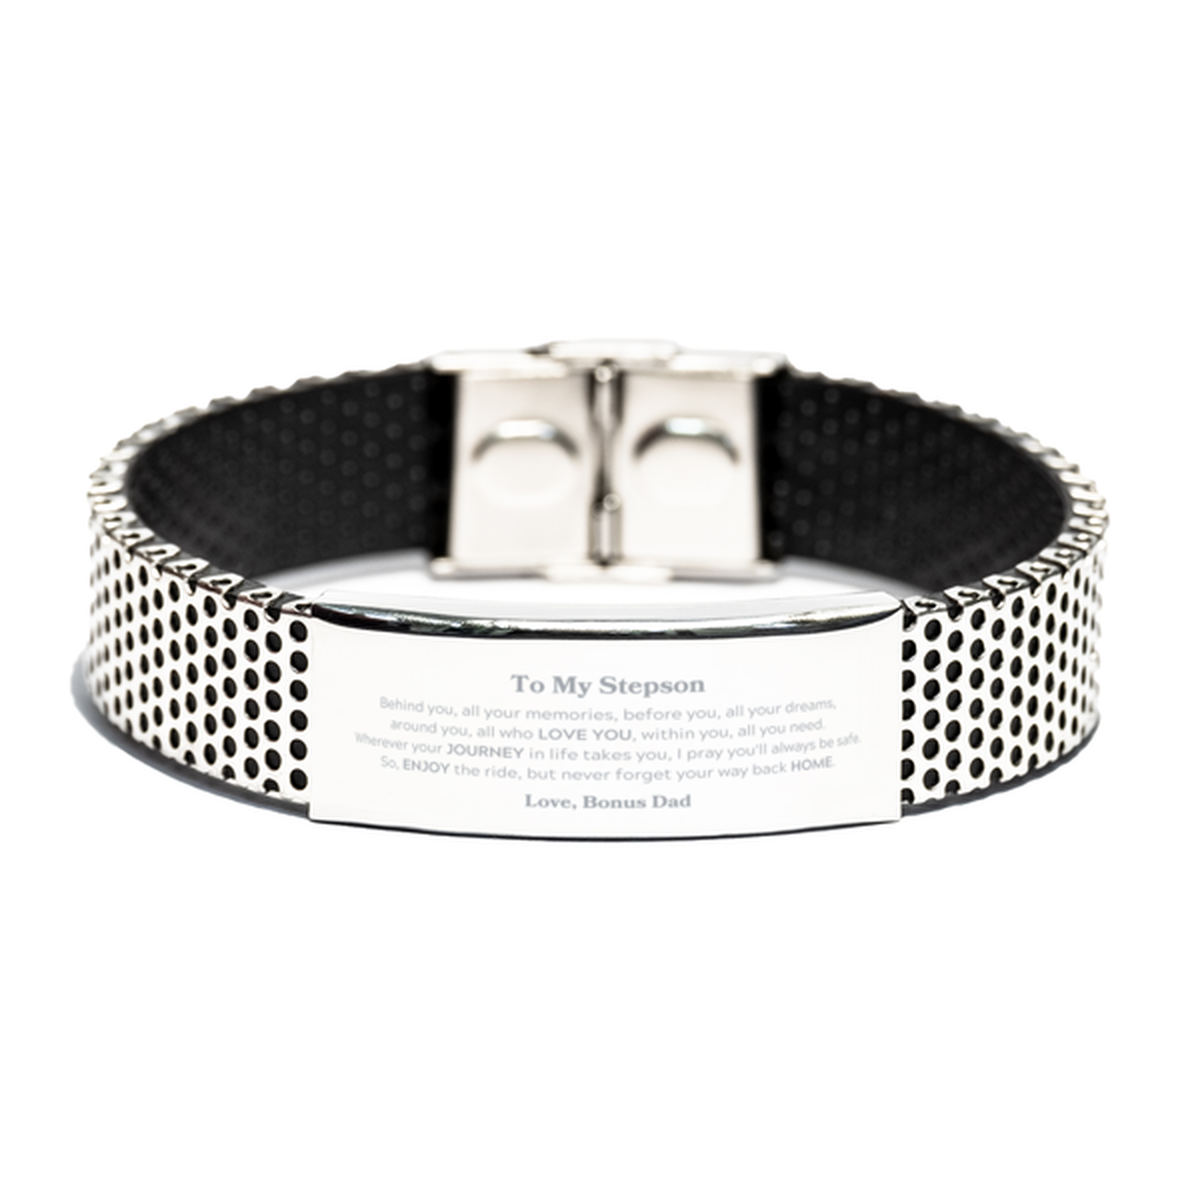 To My Stepson Graduation Gifts from Bonus Dad, Stepson Stainless Steel Bracelet Christmas Birthday Gifts for Stepson Behind you, all your memories, before you, all your dreams. Love, Bonus Dad